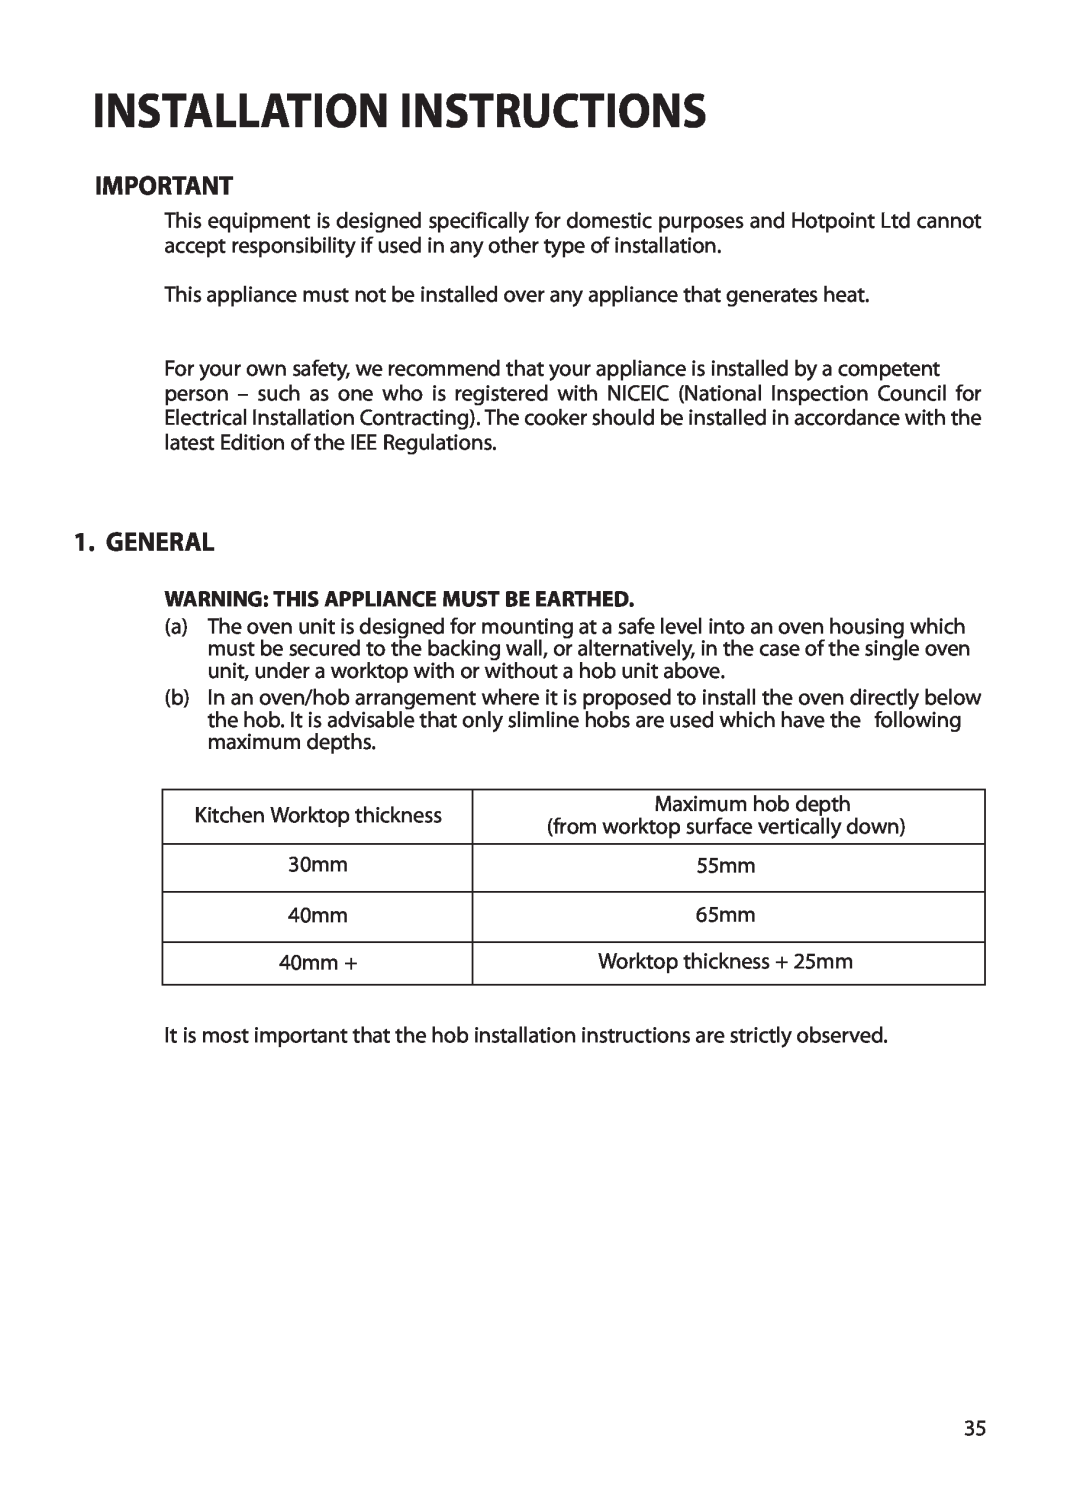 Hotpoint BS62, BS72 manual Installation Instructions, General, Warning This Appliance Must Be Earthed 